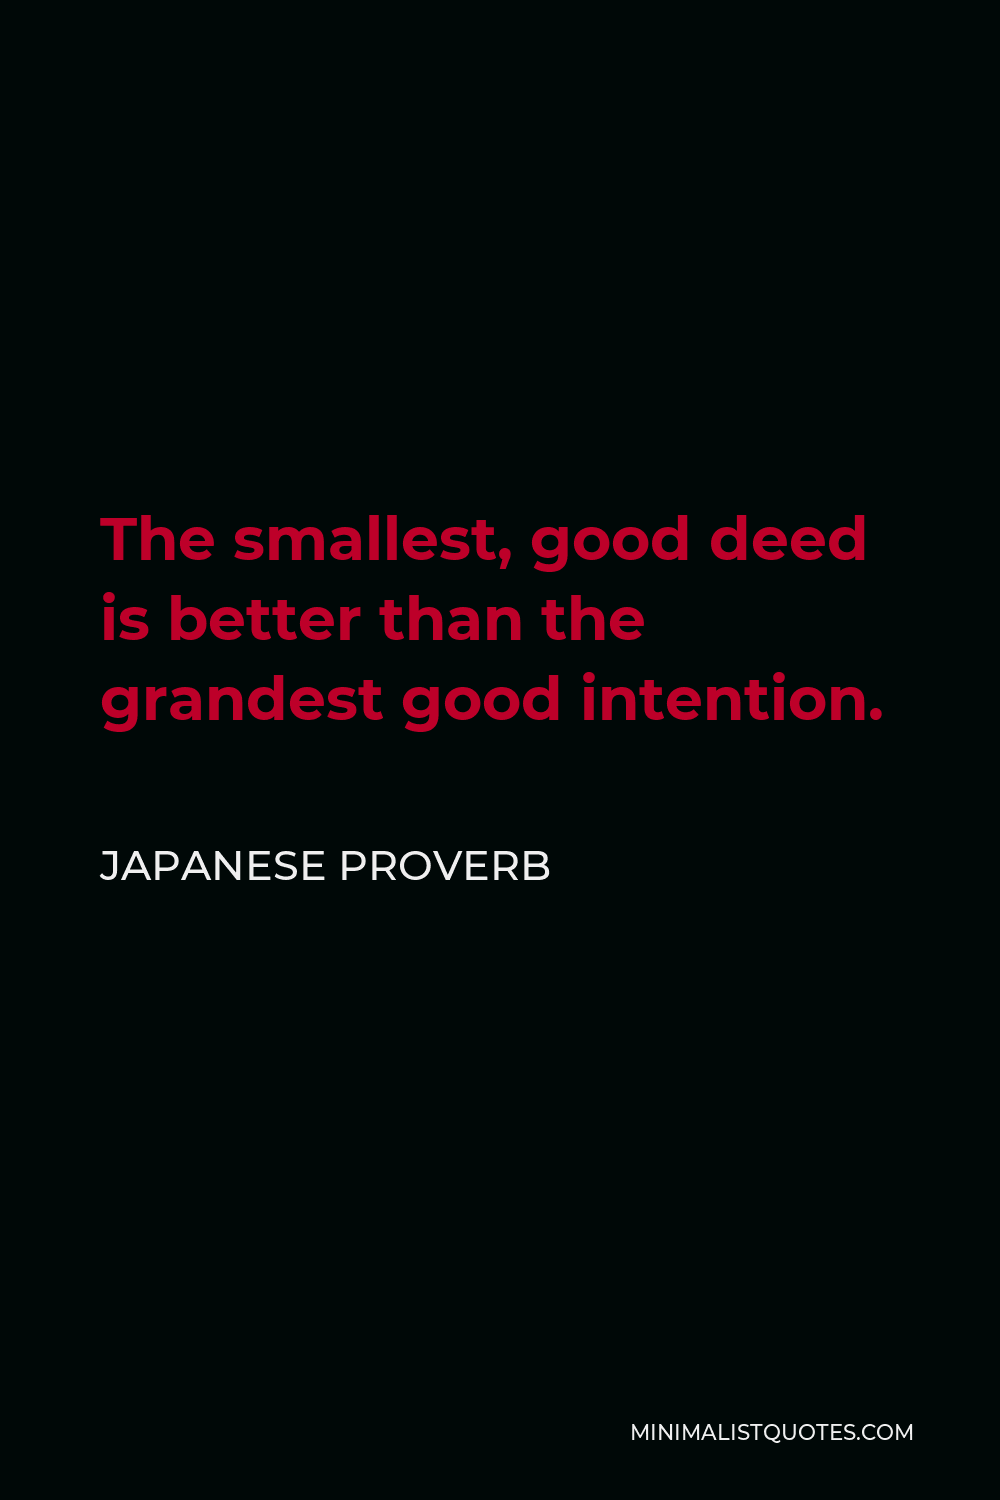 Japanese Proverb Quote - The smallest, good deed is better than the grandest good intention.